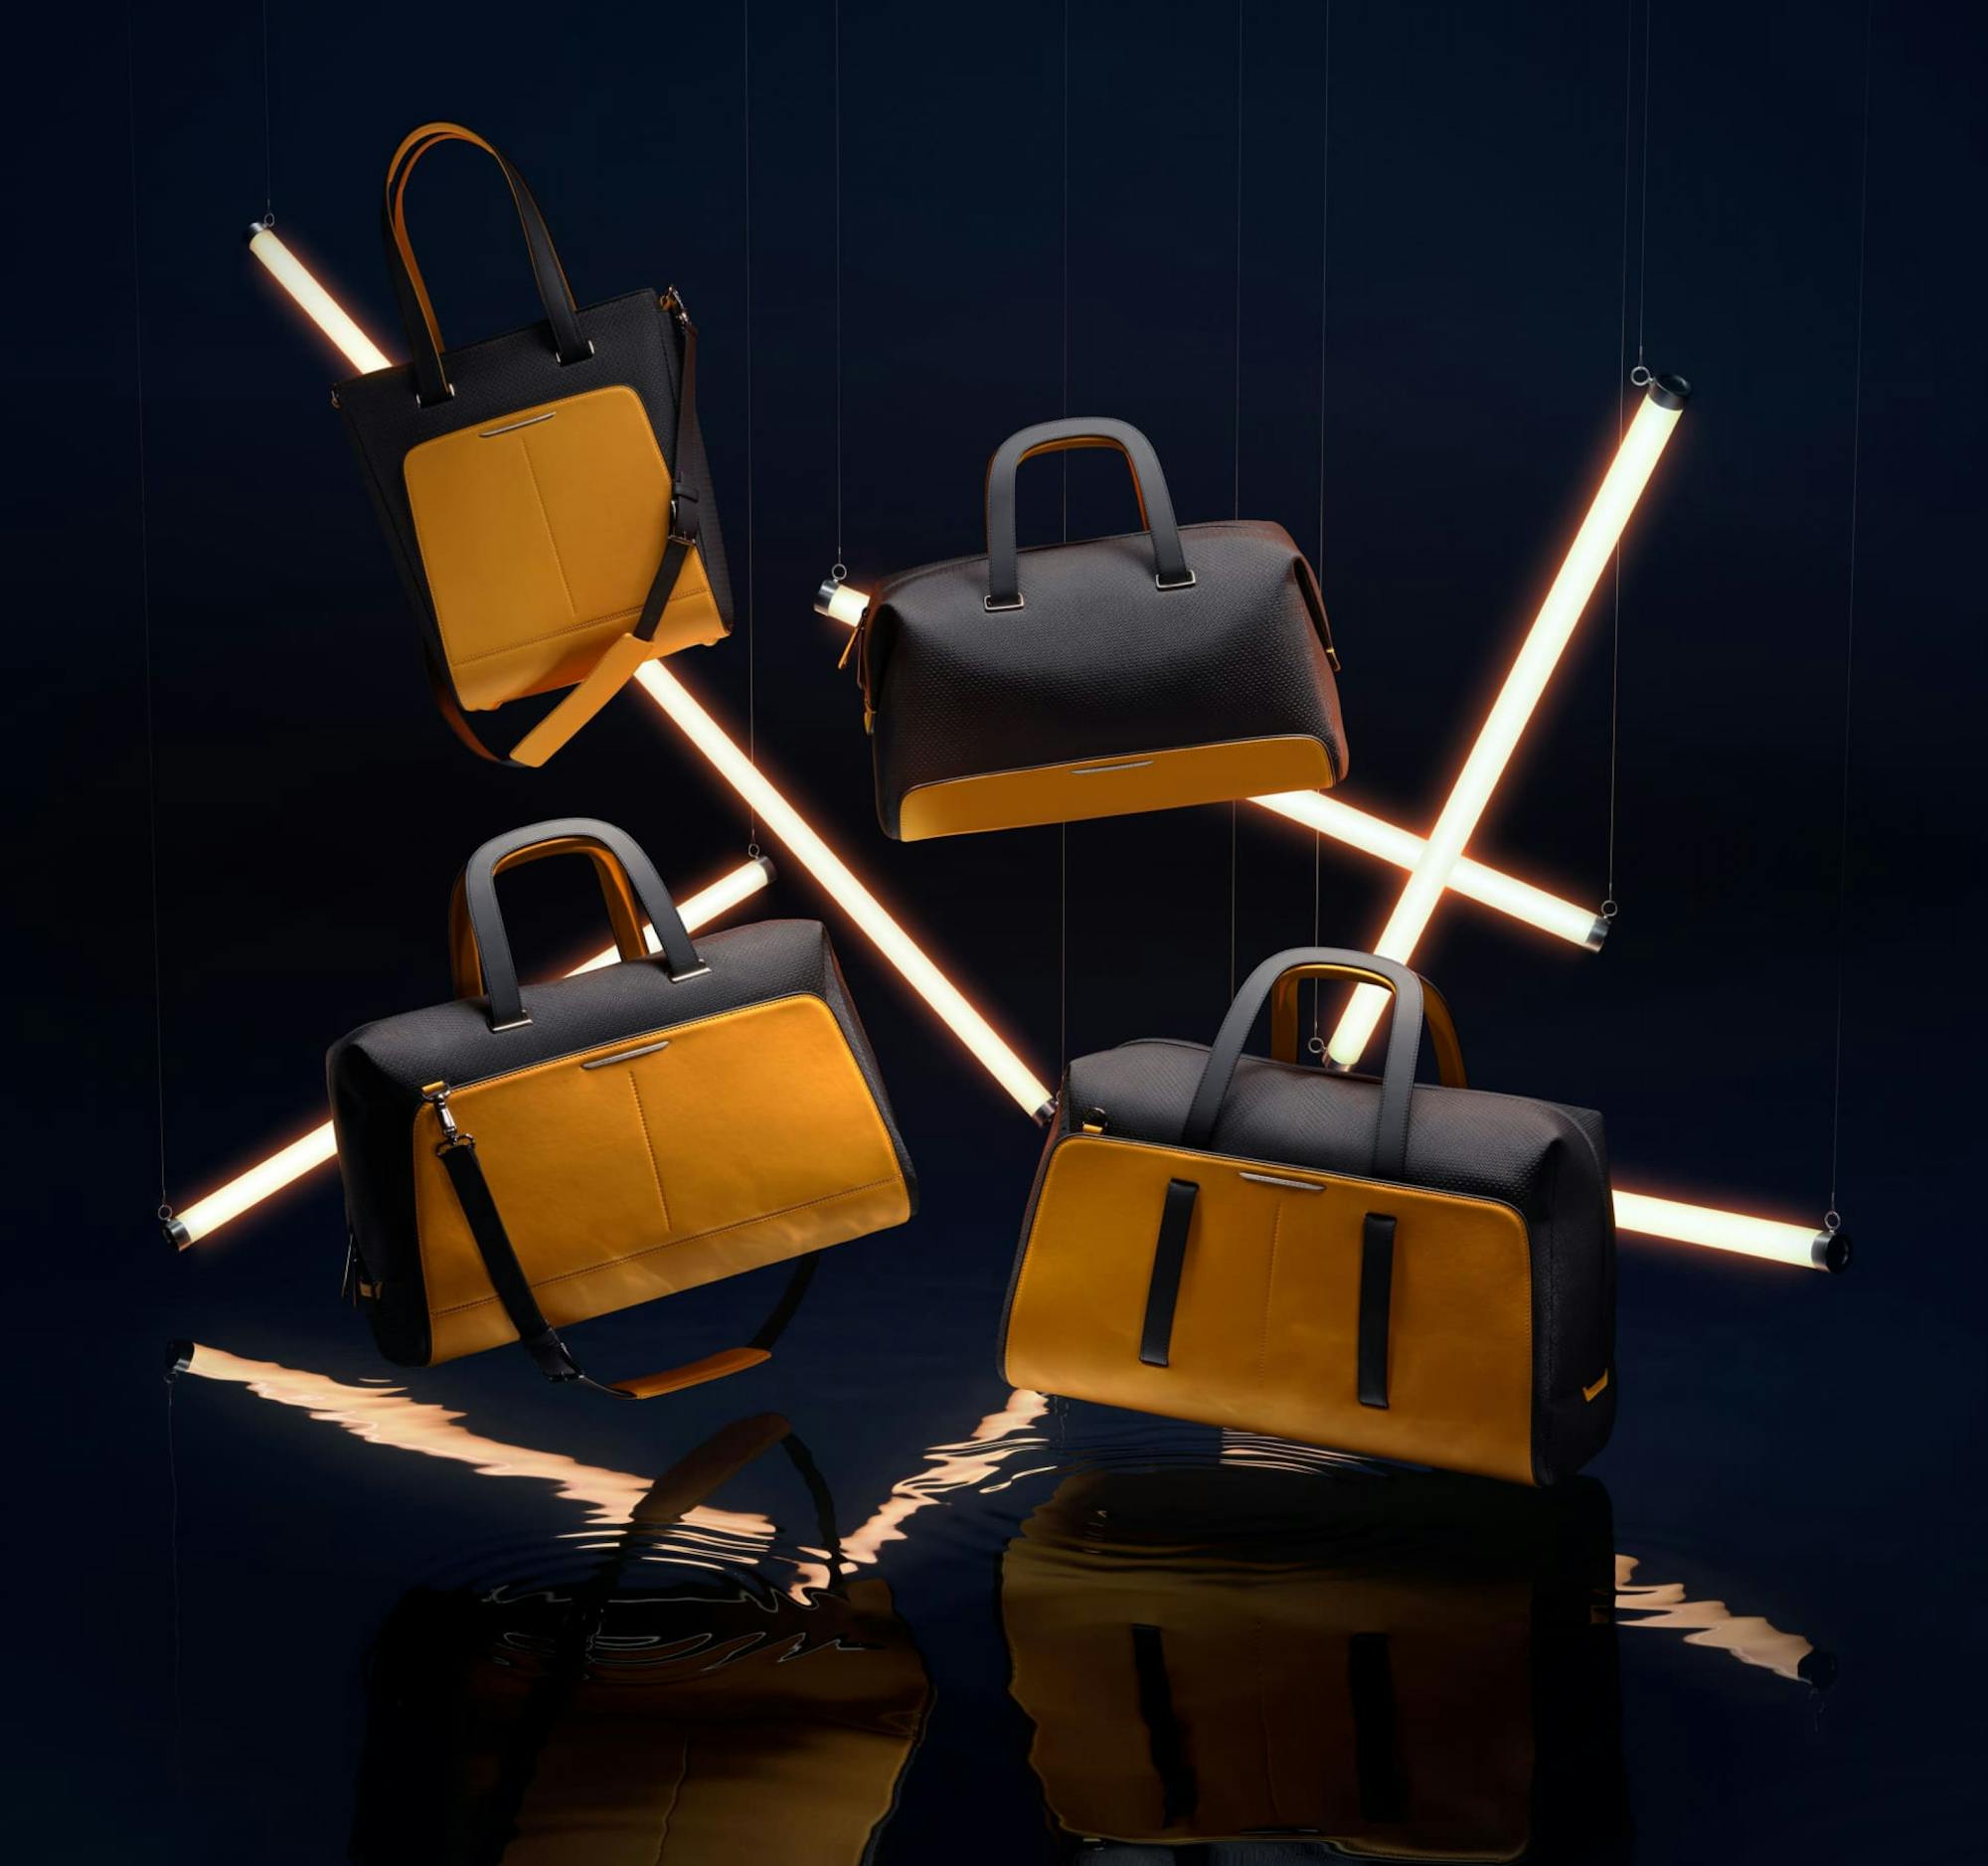 Member News Rolls-Royce's introduces the Black Badge range to the Escapism Luggage collection 